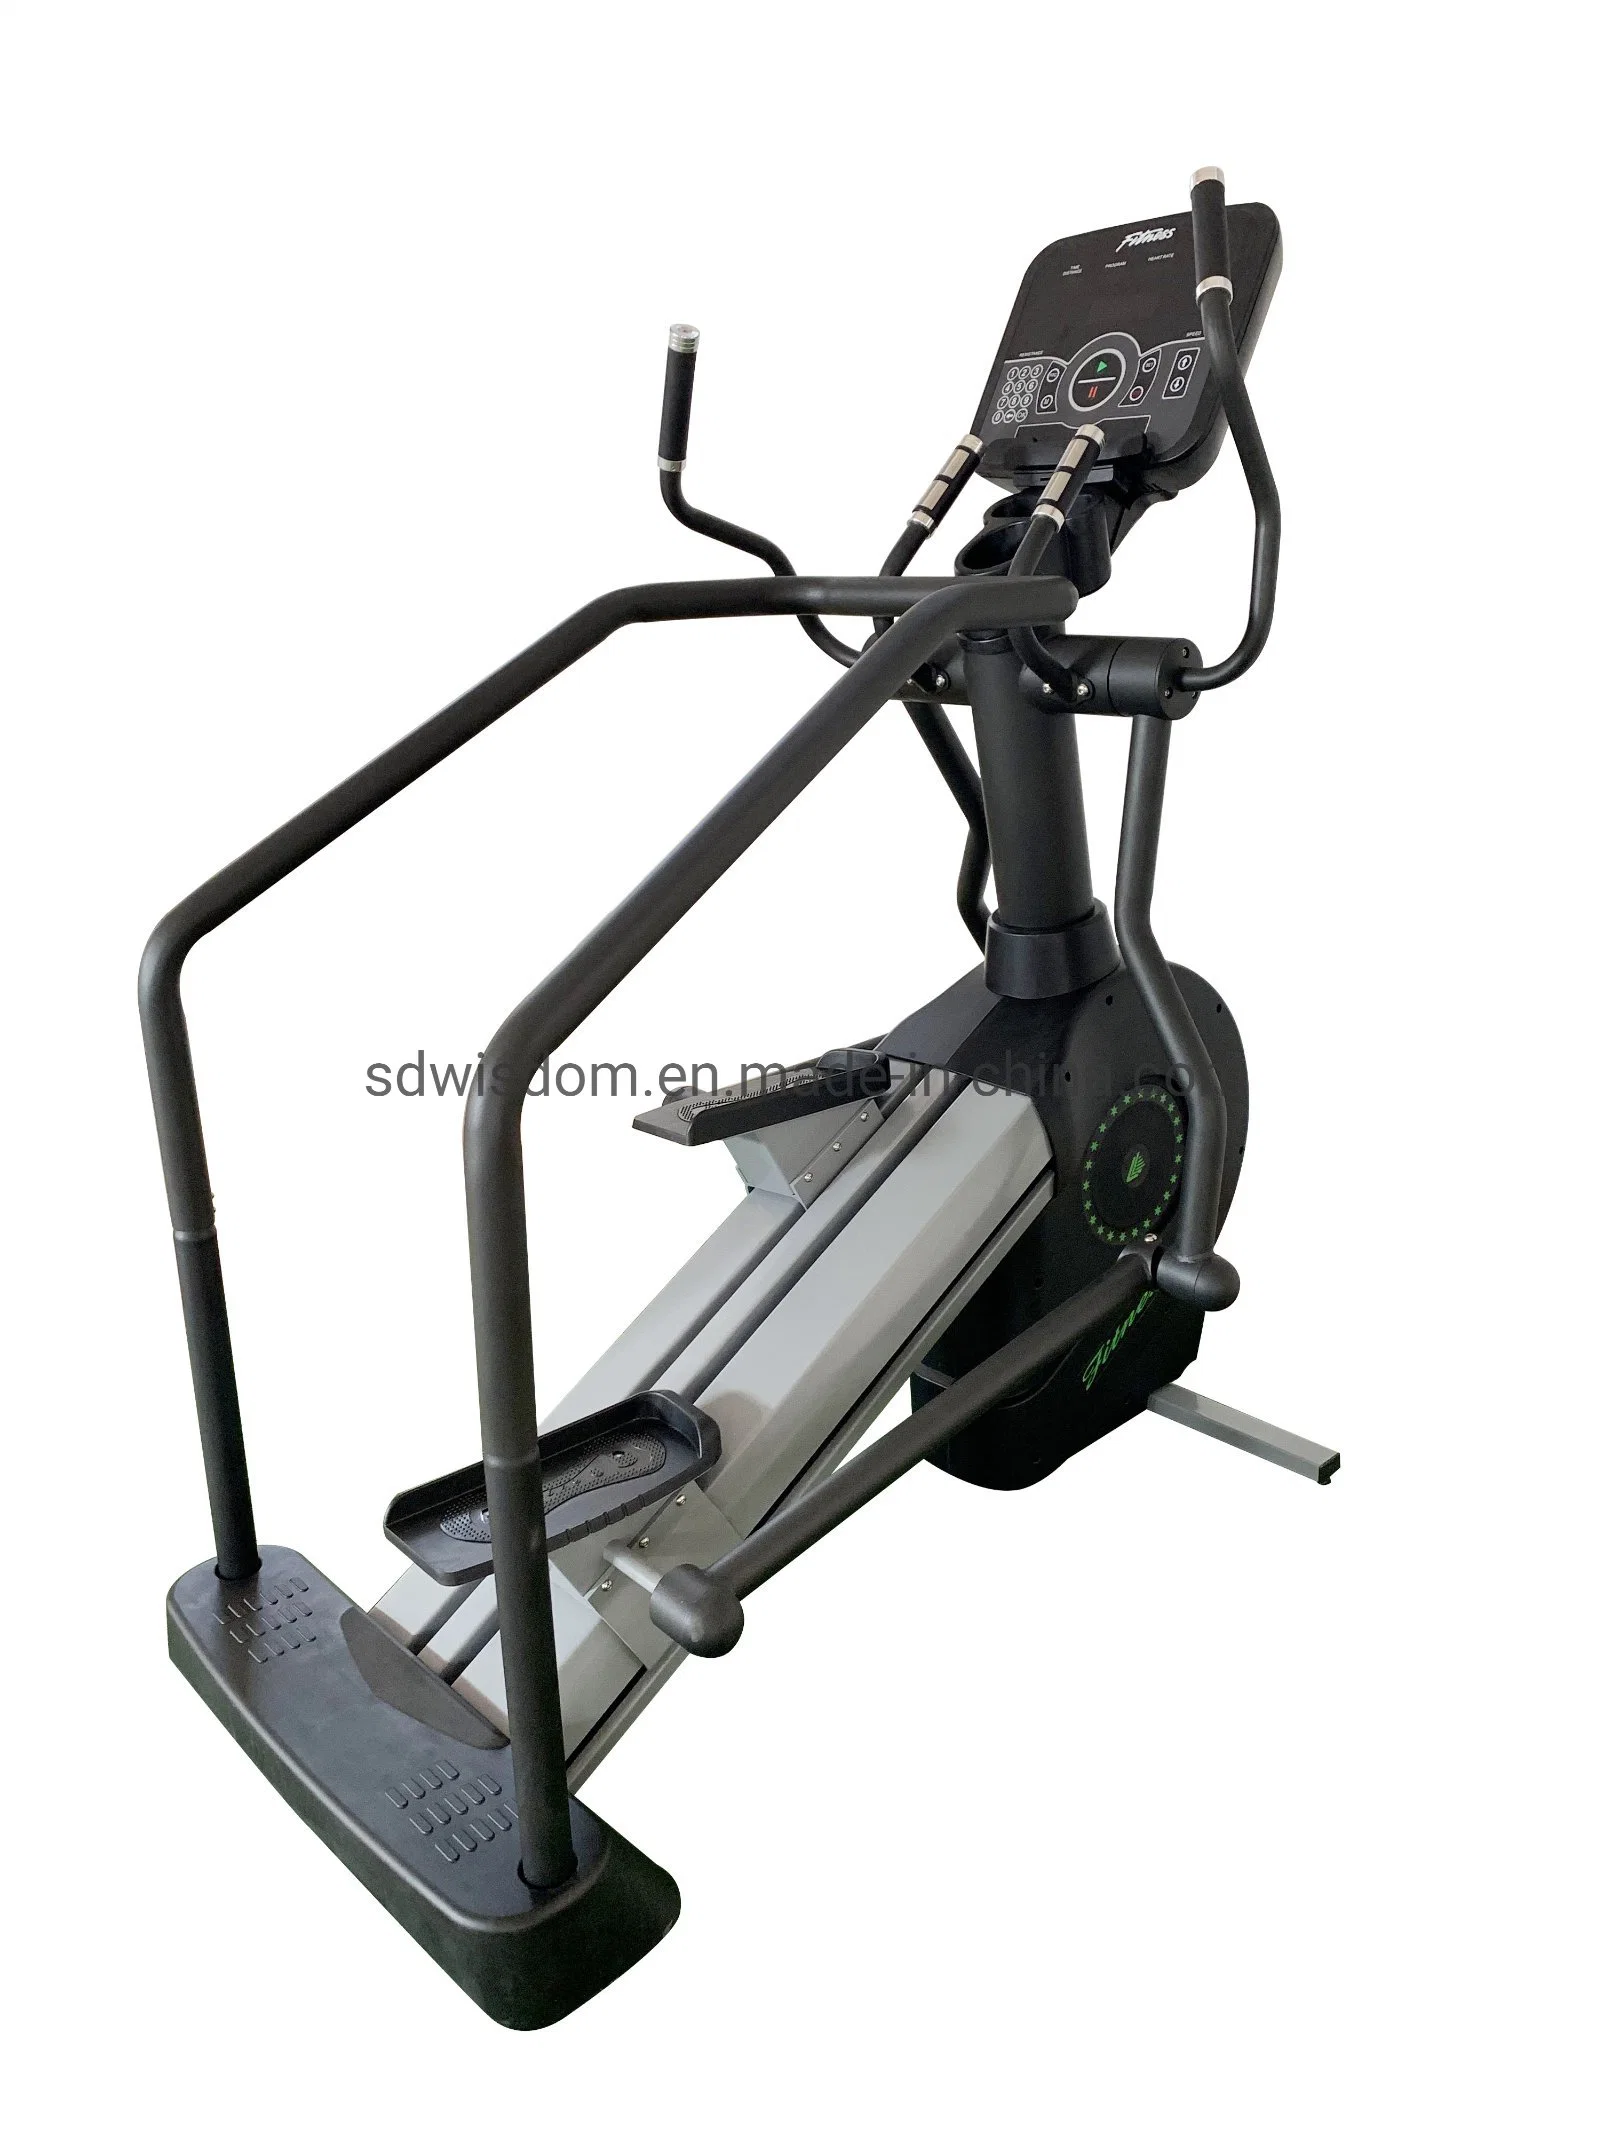 Gym Equipment Stair Climber Machine Fitness Cardio Exercise Indoor Commercial Climbing Machine Stair Climber